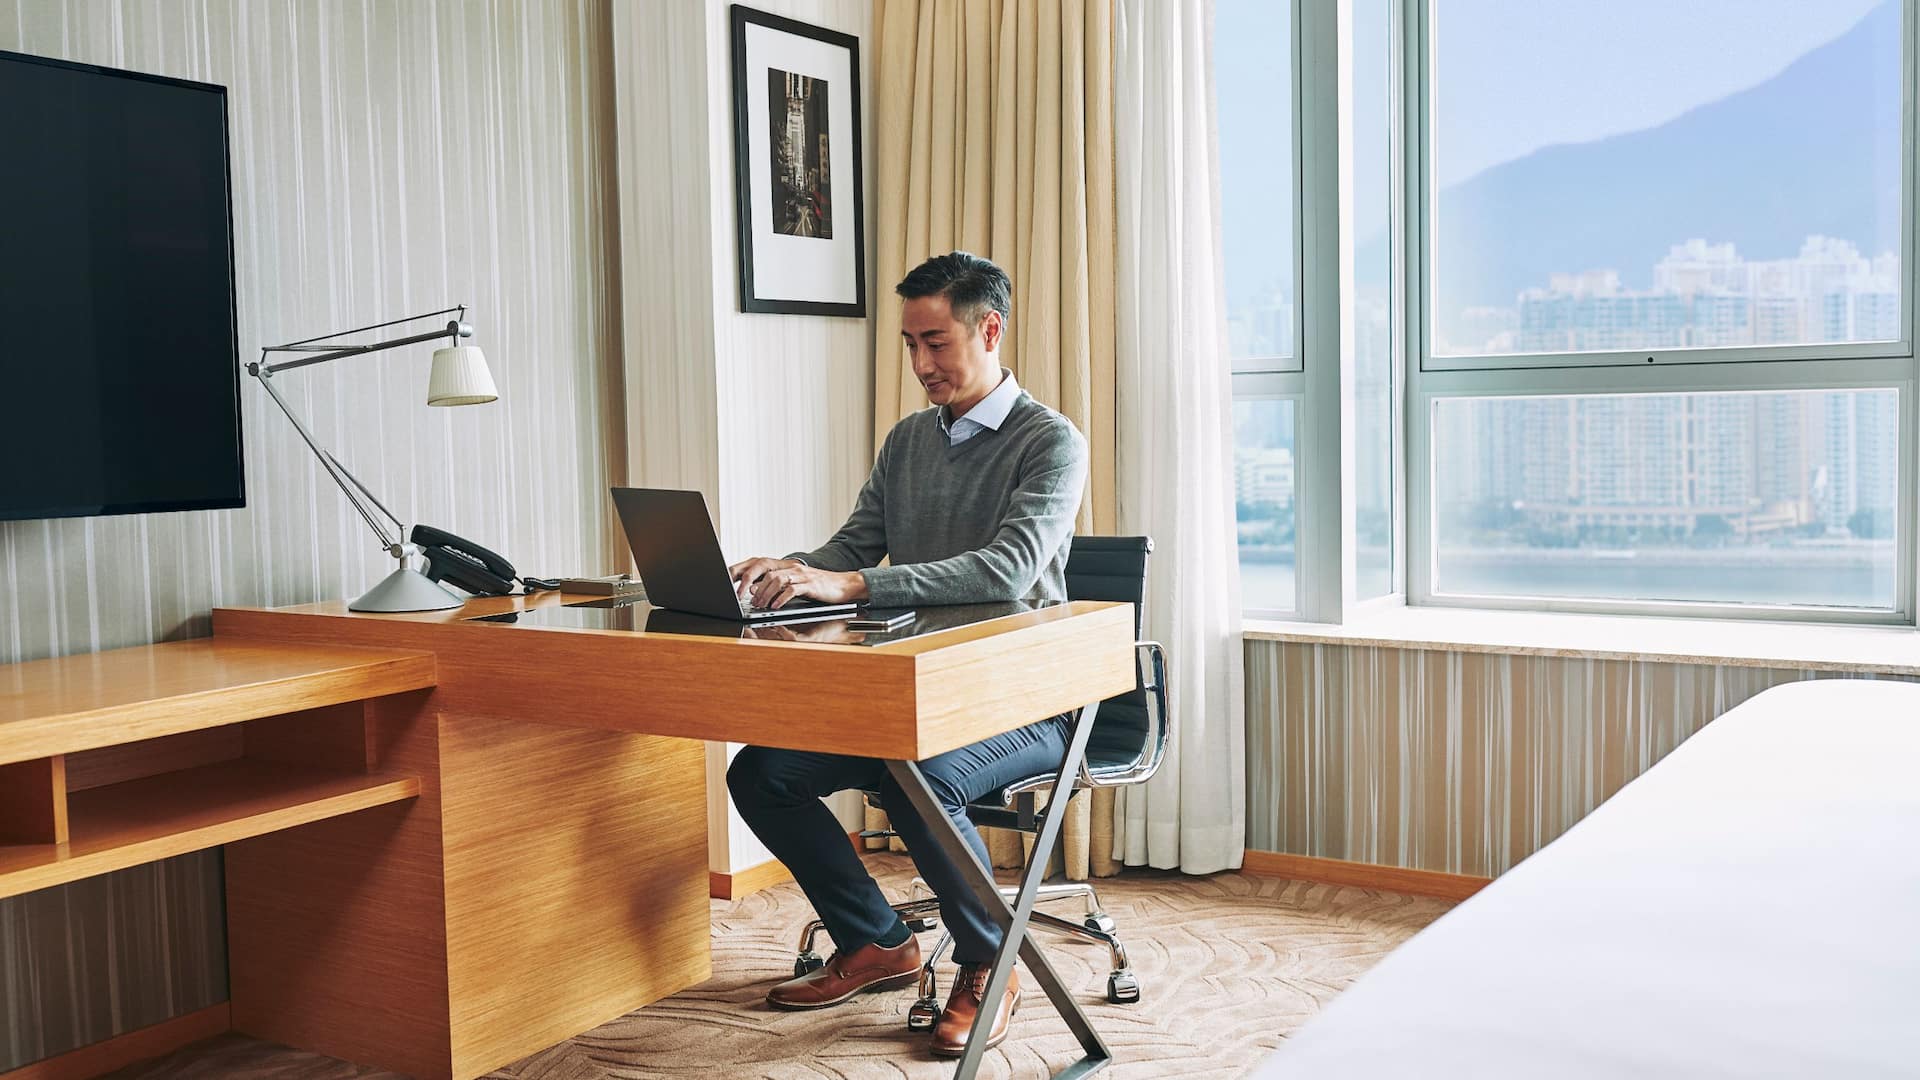 Hyatt expanded its Work from Hyatt extended-stay package to include a new Office for the Day option